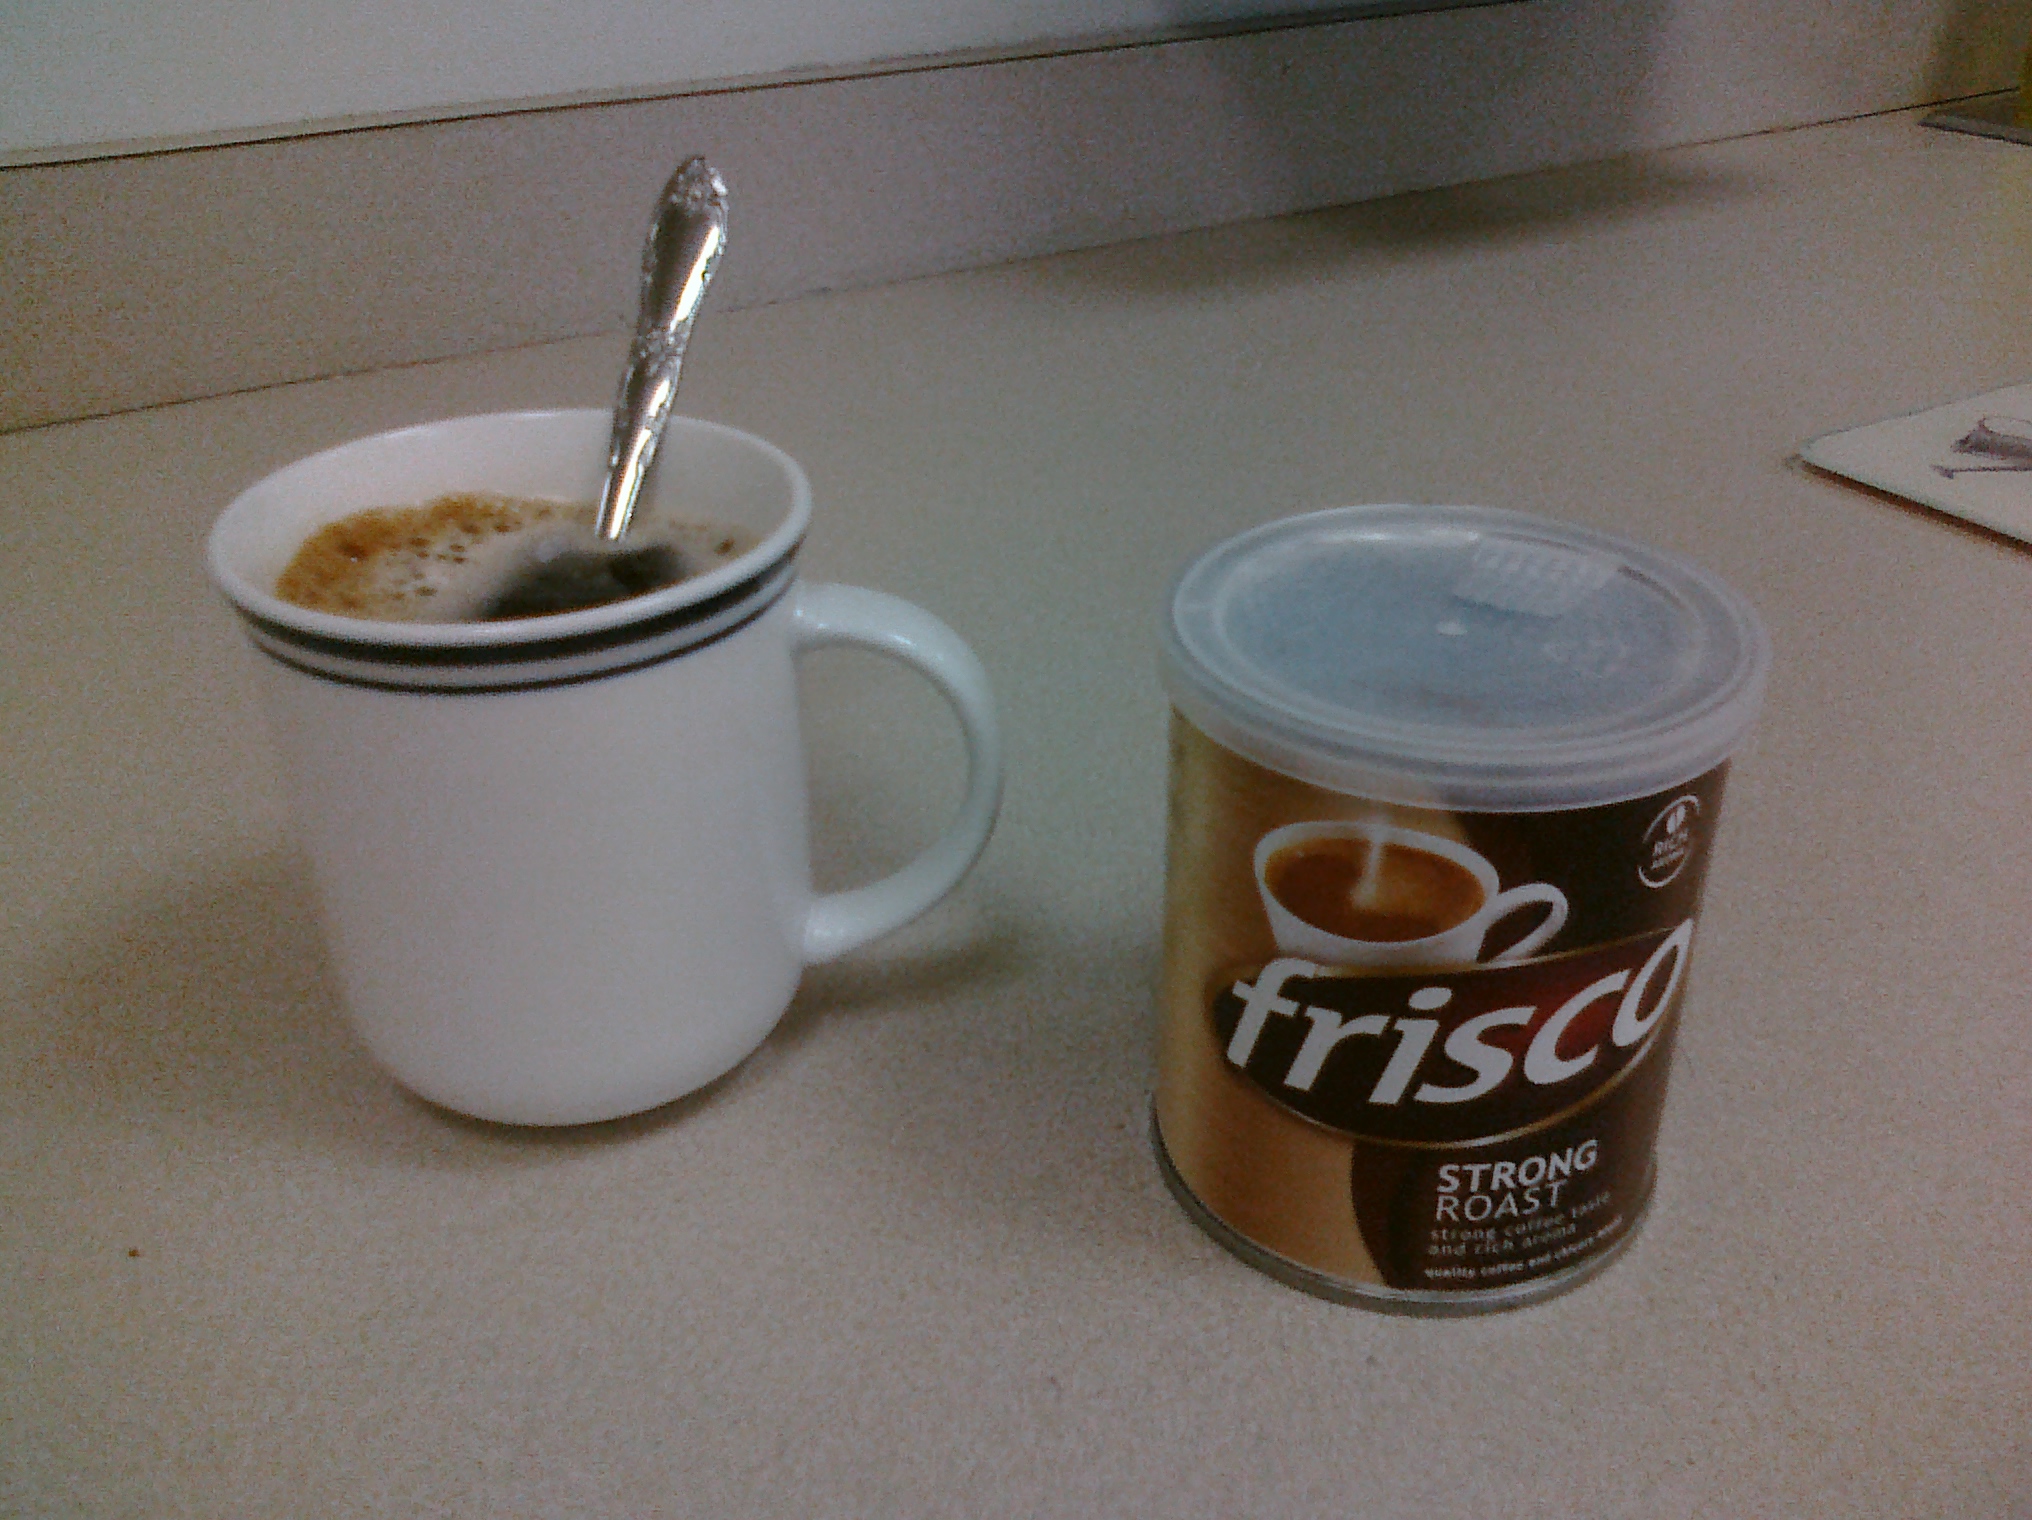 a coffee cup with a spoon is next to a can of frisca